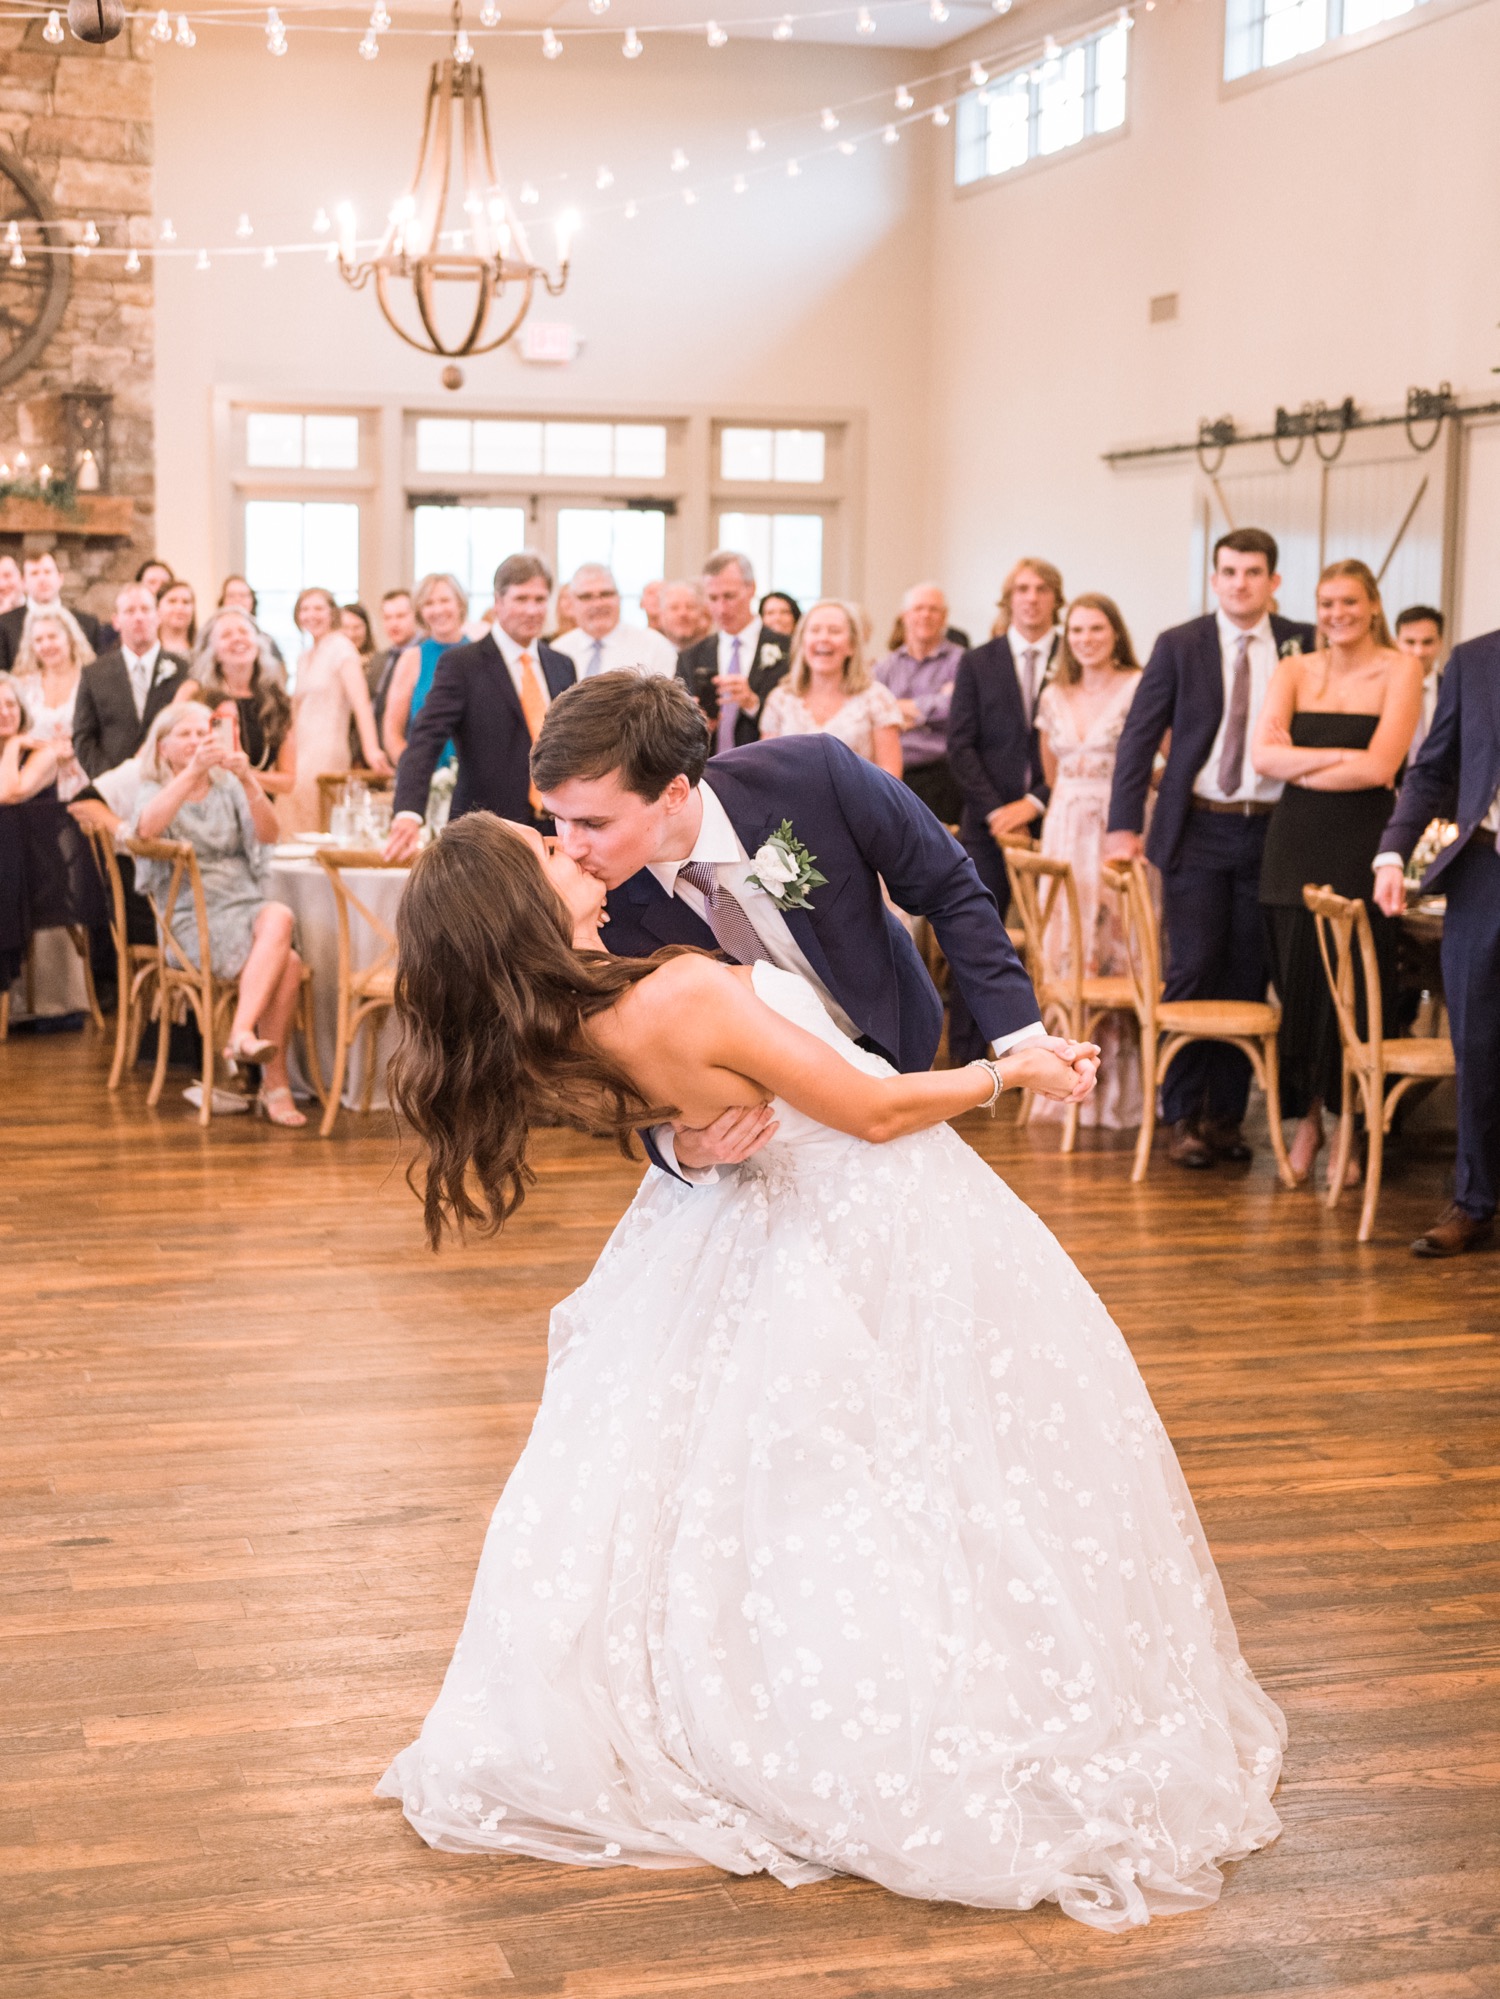 bride and groom sharing their first dance during their wedding reception at the King Family Vineyard